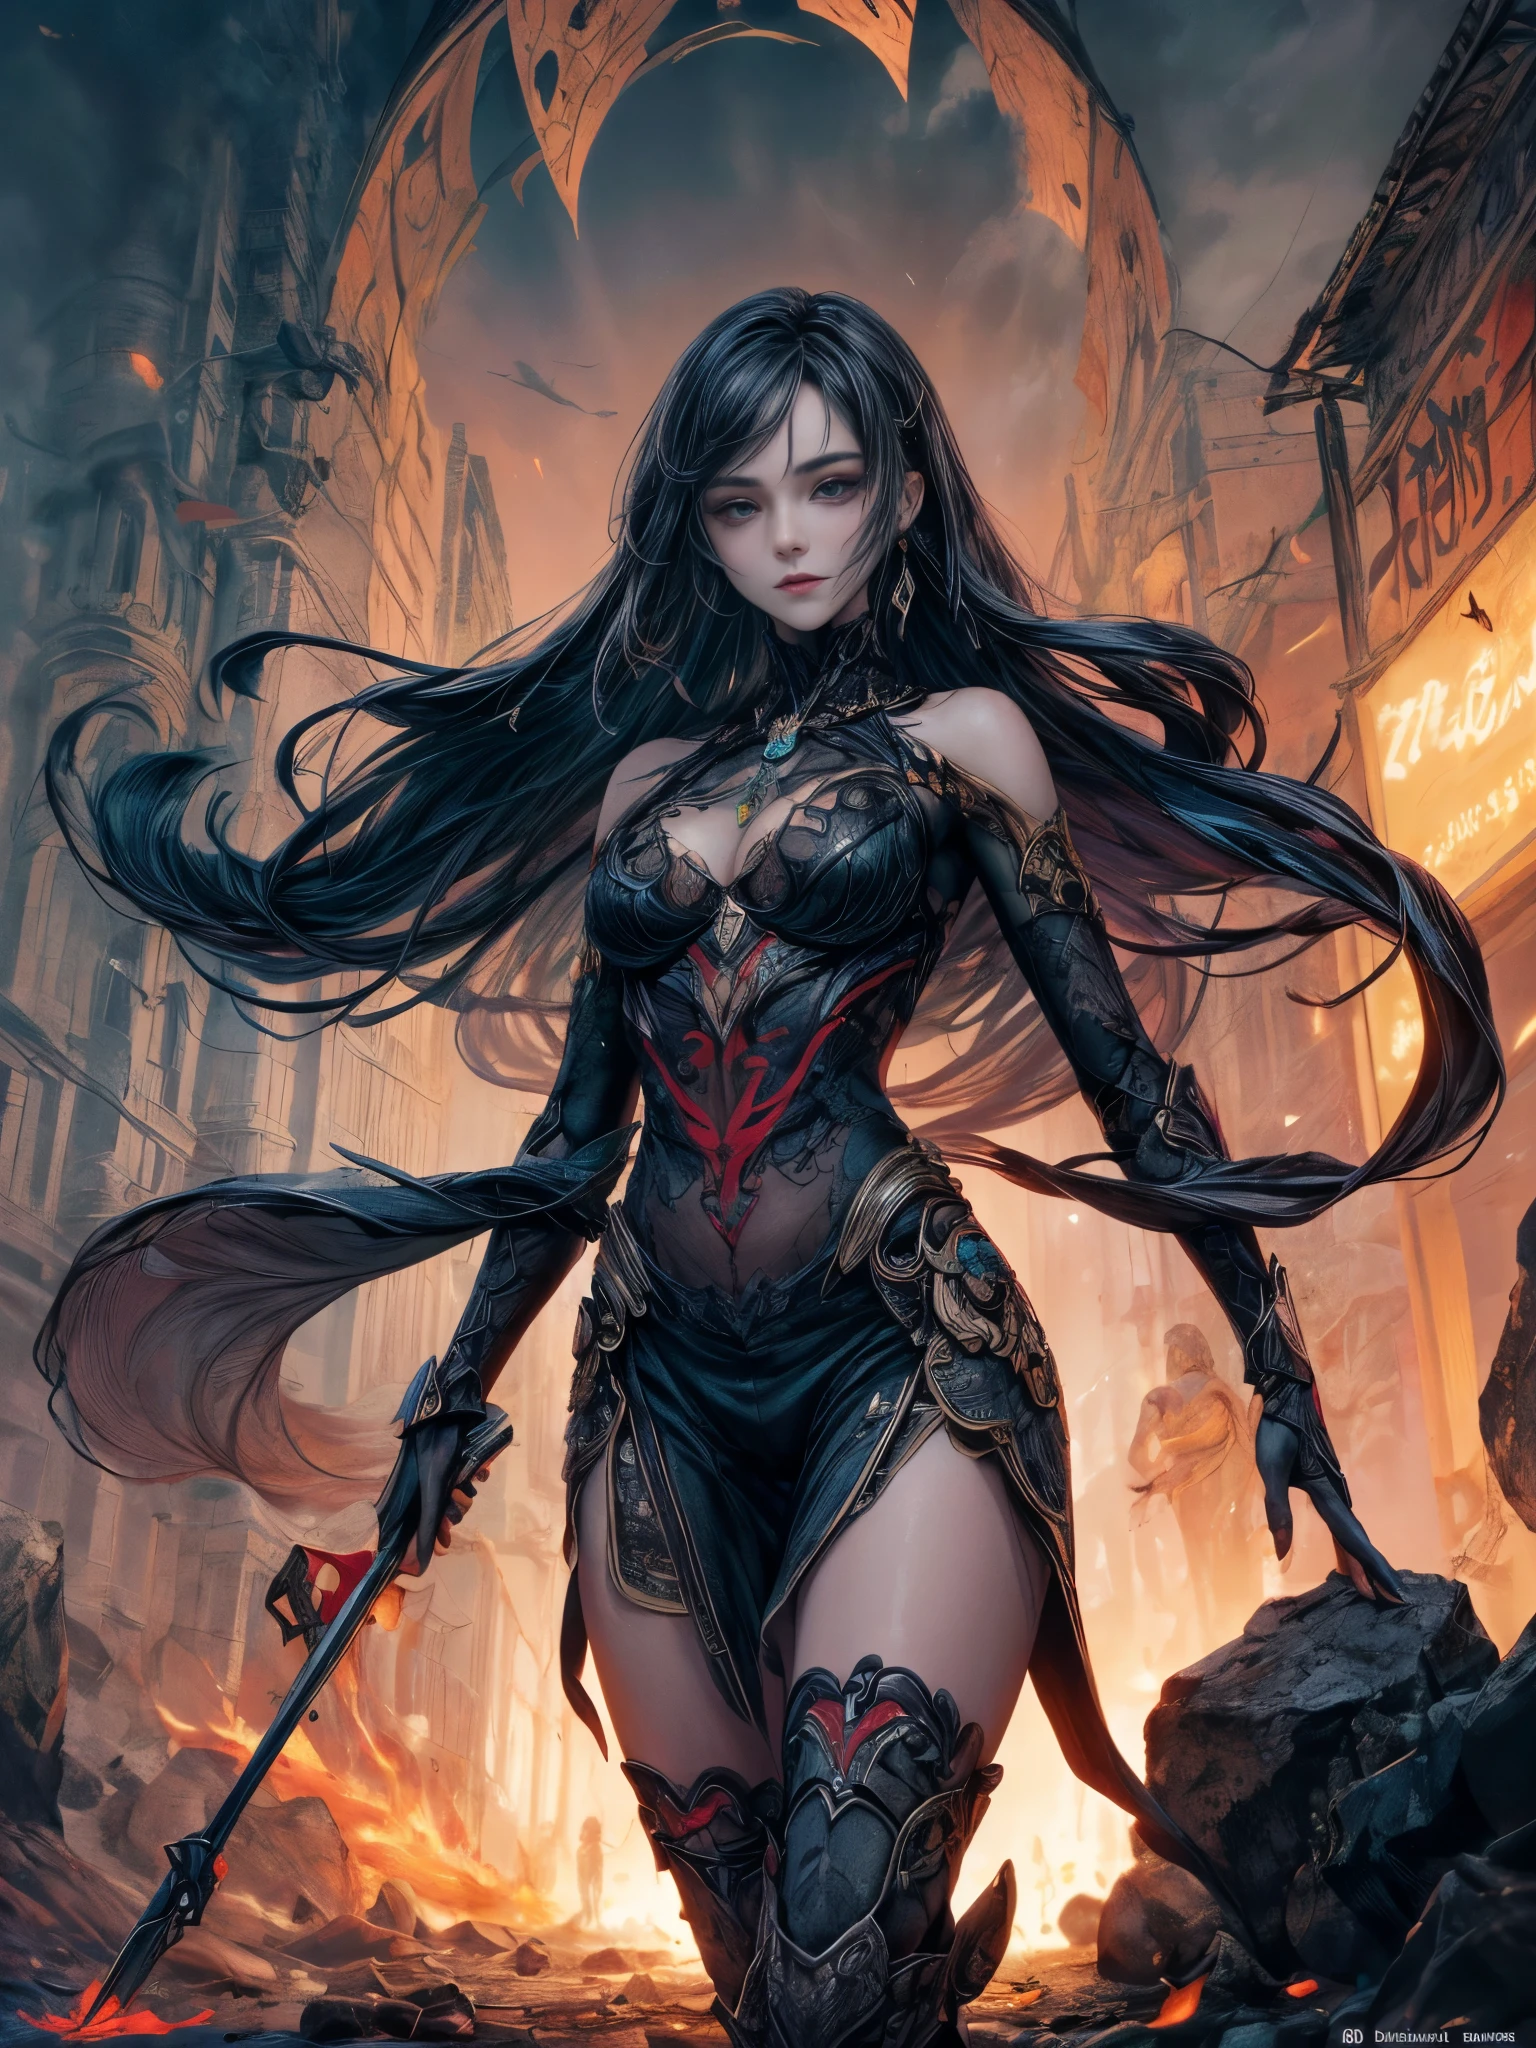 dark and torn, 1 young beautiful muscular body, fierce expression, holding a gun, (colors in your clothes, warm, Orange, yellow, violet:1.3), standing in a desolate wasteland, dramatic lighting, intense shadows, sandy texture, tall contrast, vibrant colors, dynamic pose, powerful posture, rough background, explosive atmosphere, dystopian theme, surreal elements, digitally painted illustration, high definition resolution, intricate details, dramatic composition, avant-garde and chaotic brushstrokes, gothic style, intense emotions, epic scale, raw and gritty feeling, Captivating and provocative works of art..